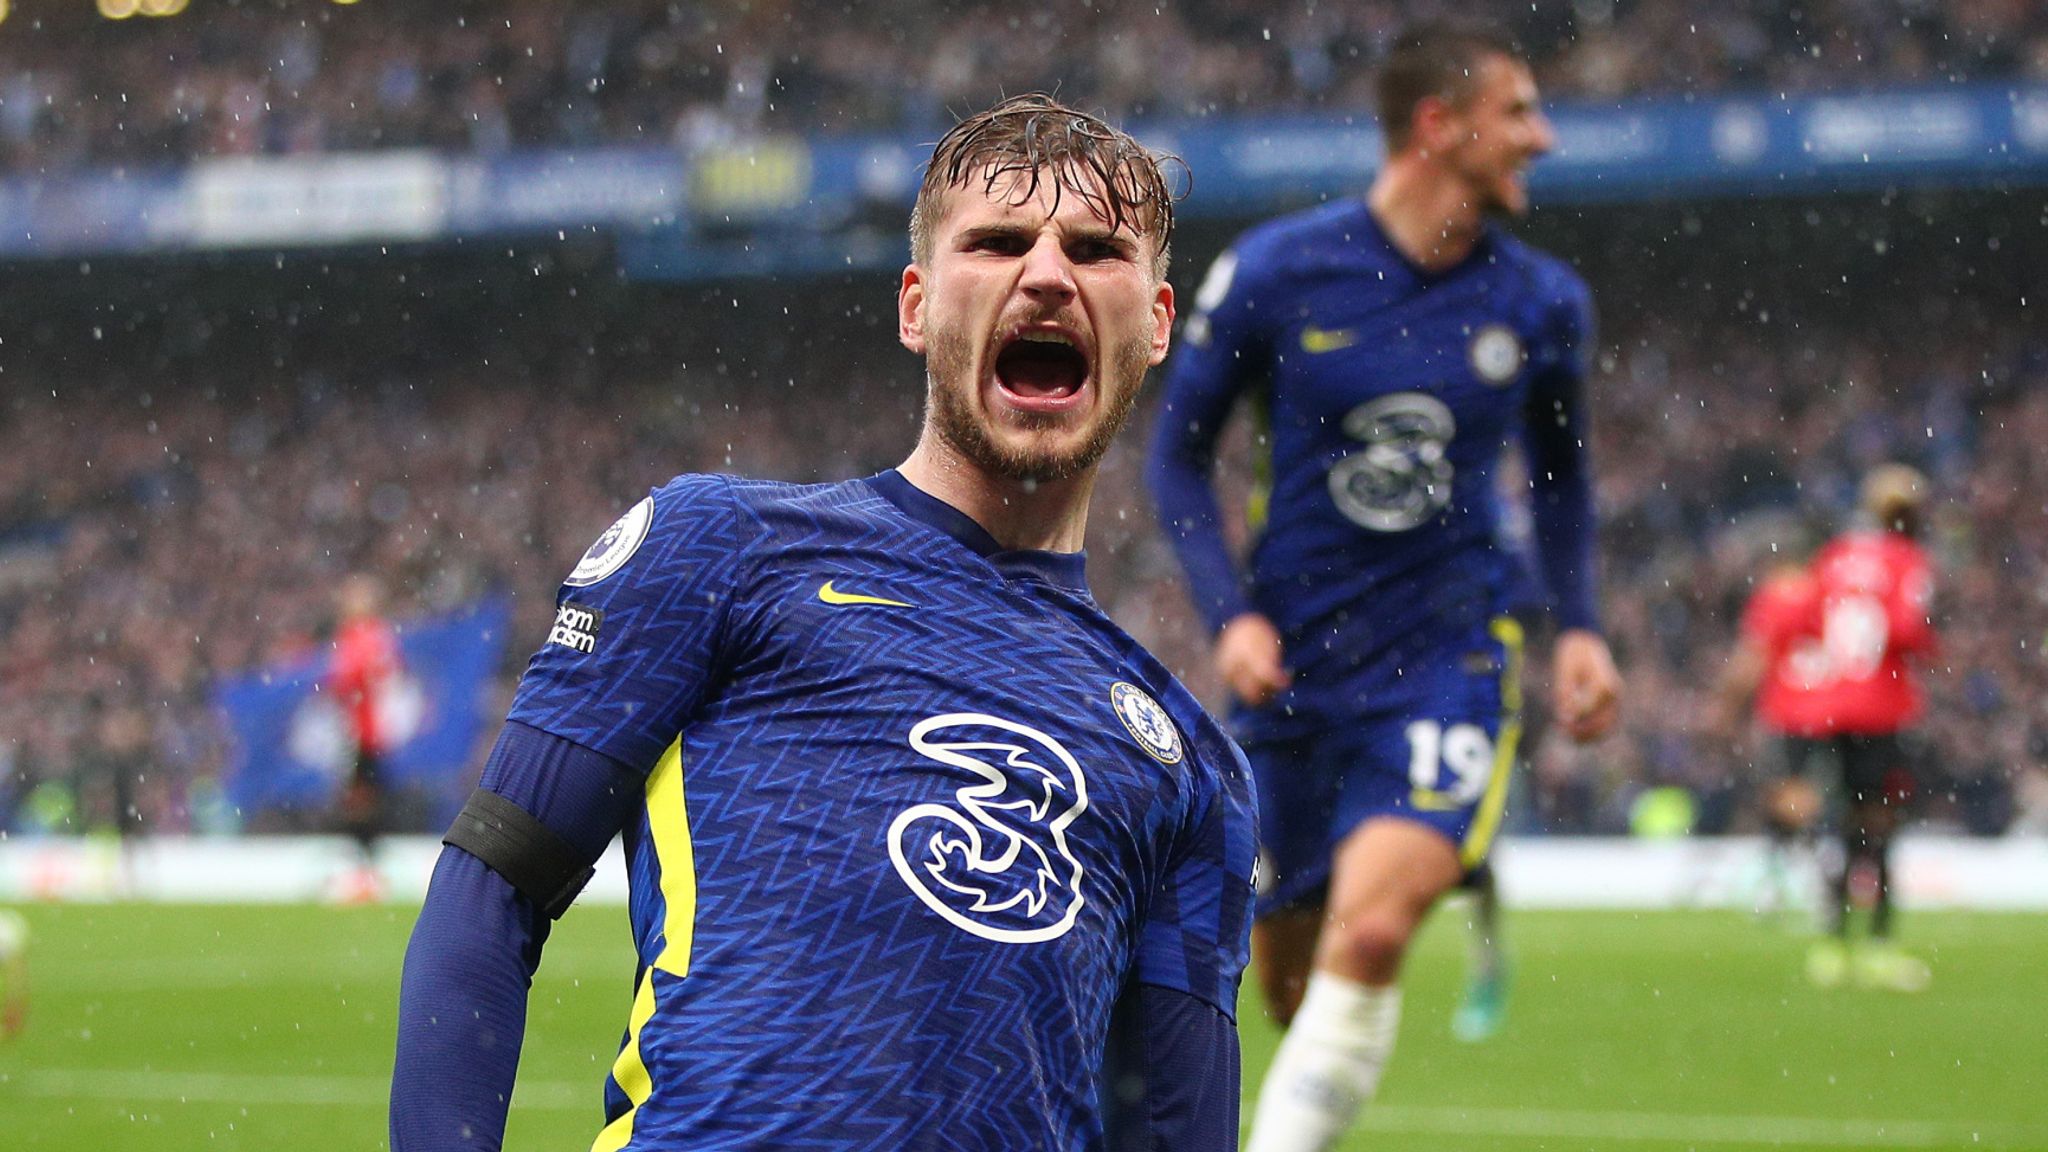 Chelsea 3-1 Southampton Timo Werner overcomes VAR setback to fire hosts back to winning ways Football News Sky Sports